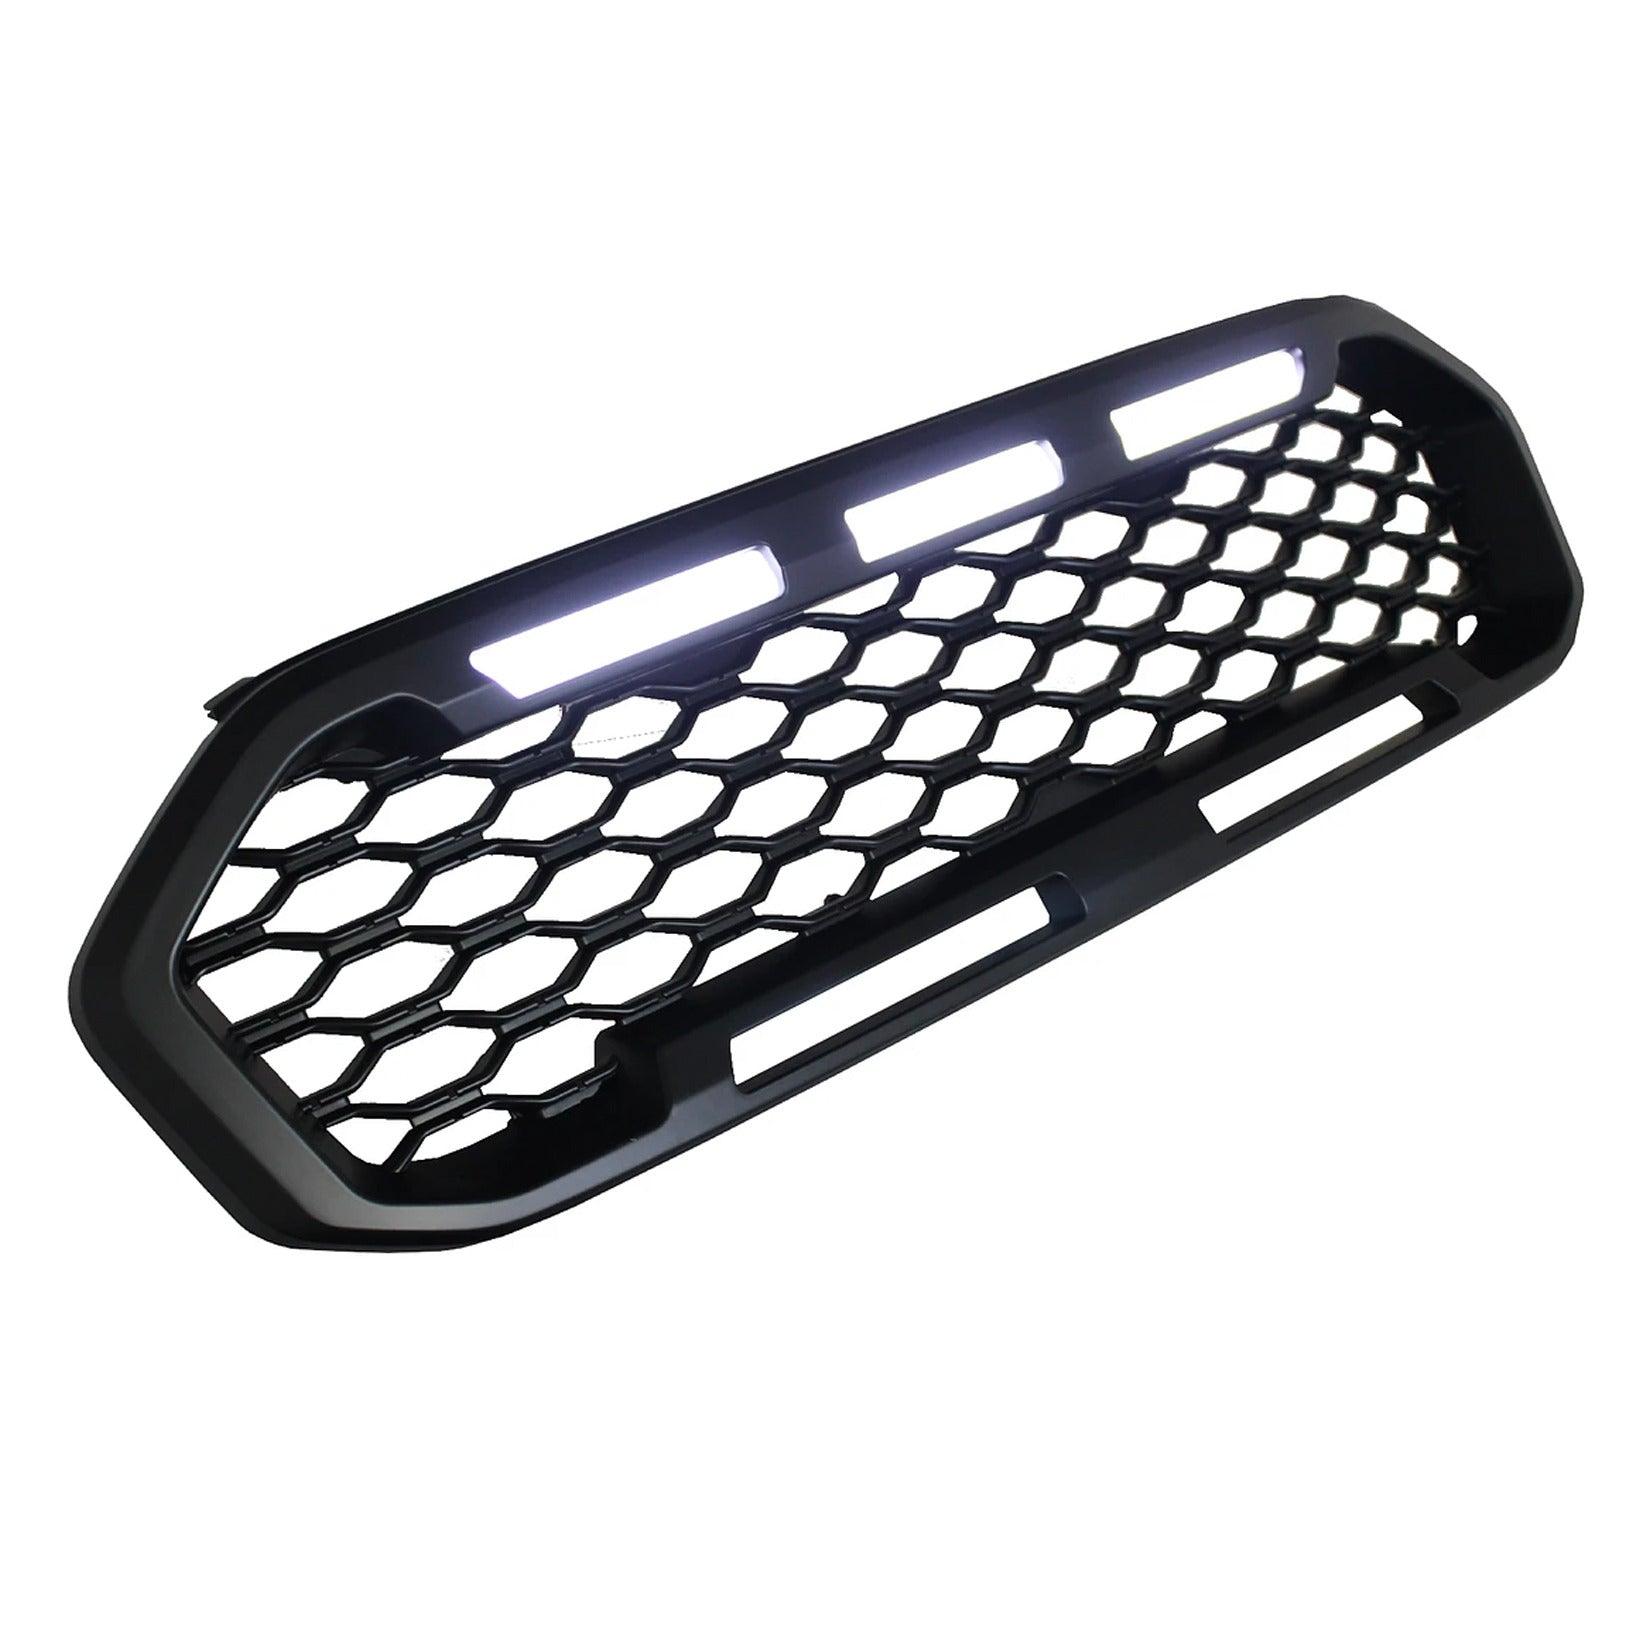 FORD RANGER T6 2019 - 2022 - REPLACEMENT GRILL WITH LEDS - BLACK - MESH STYLE - NOT WILDTRAK - Storm Xccessories2